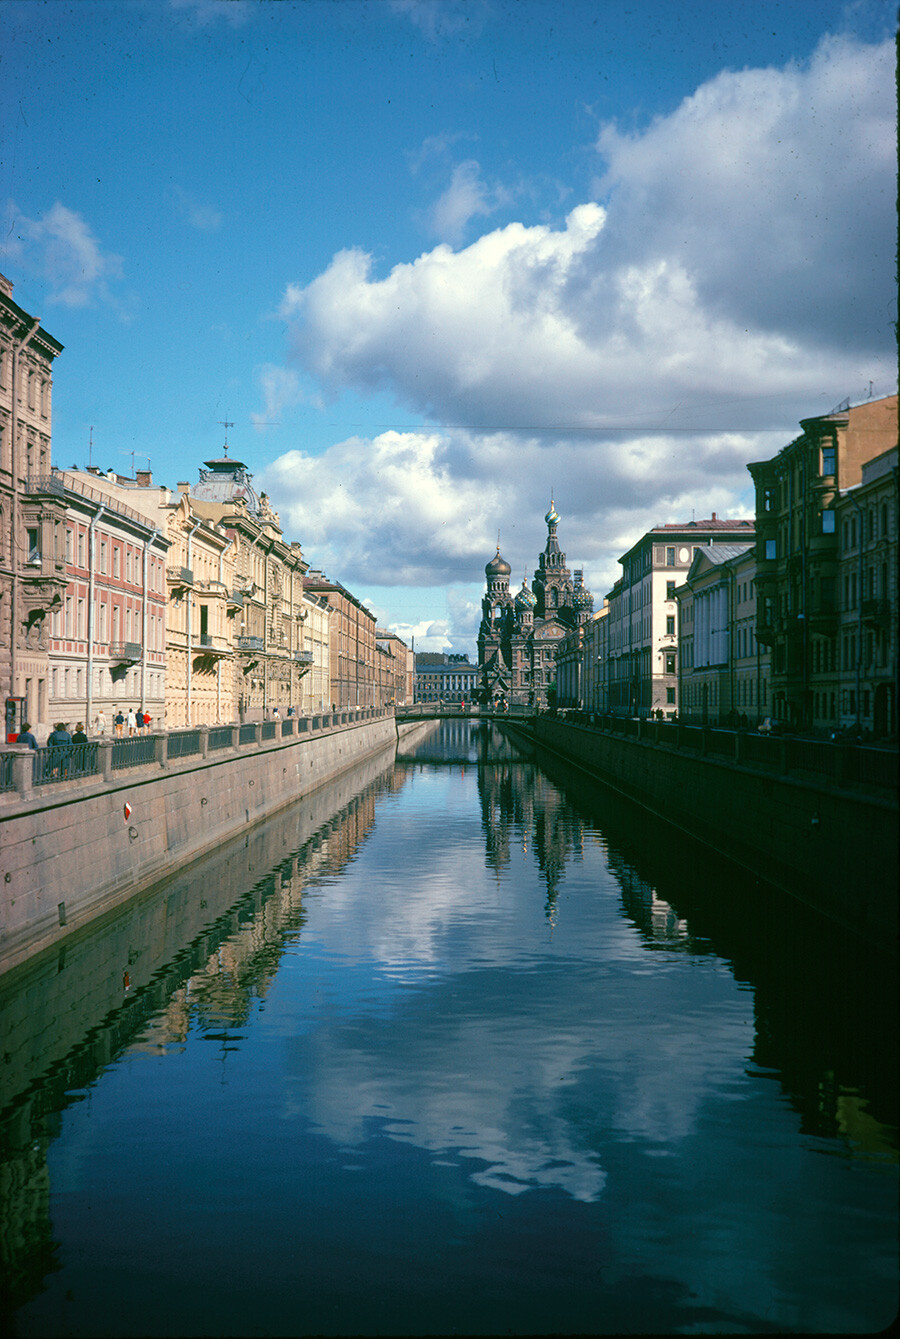 St. Petersburg. Griboedov (formerly Catherine) Canal. view north from Nevsky Prospekt toward Cathedral of the Resurrection of the Savior on the Blood. September 8, 1971